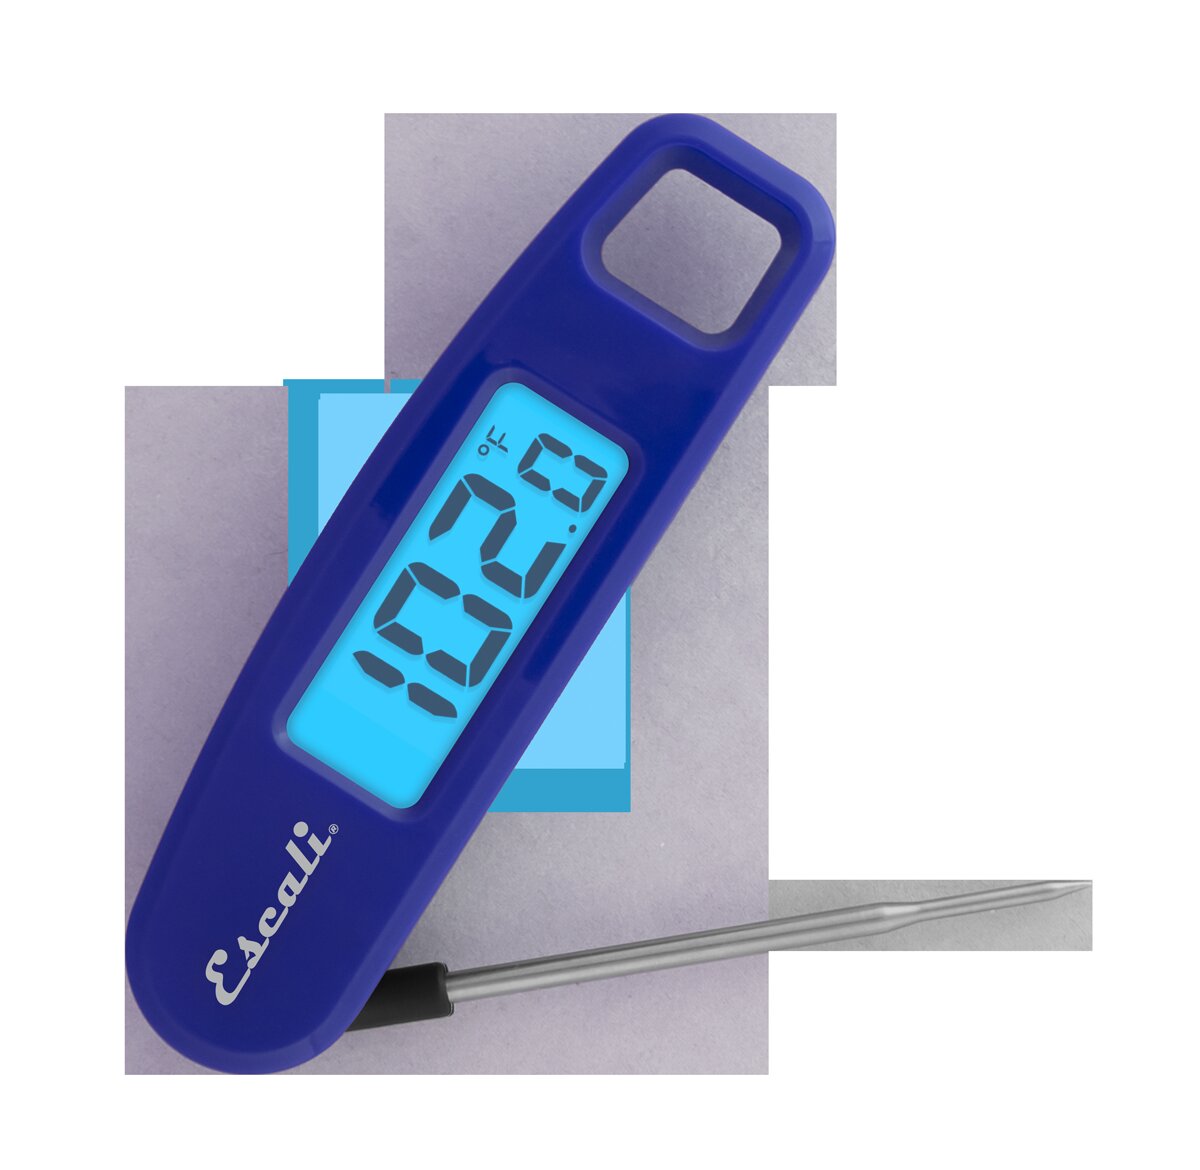 Escali Infrared Surface & Pronbe 2-in-1 Digital Thermometer